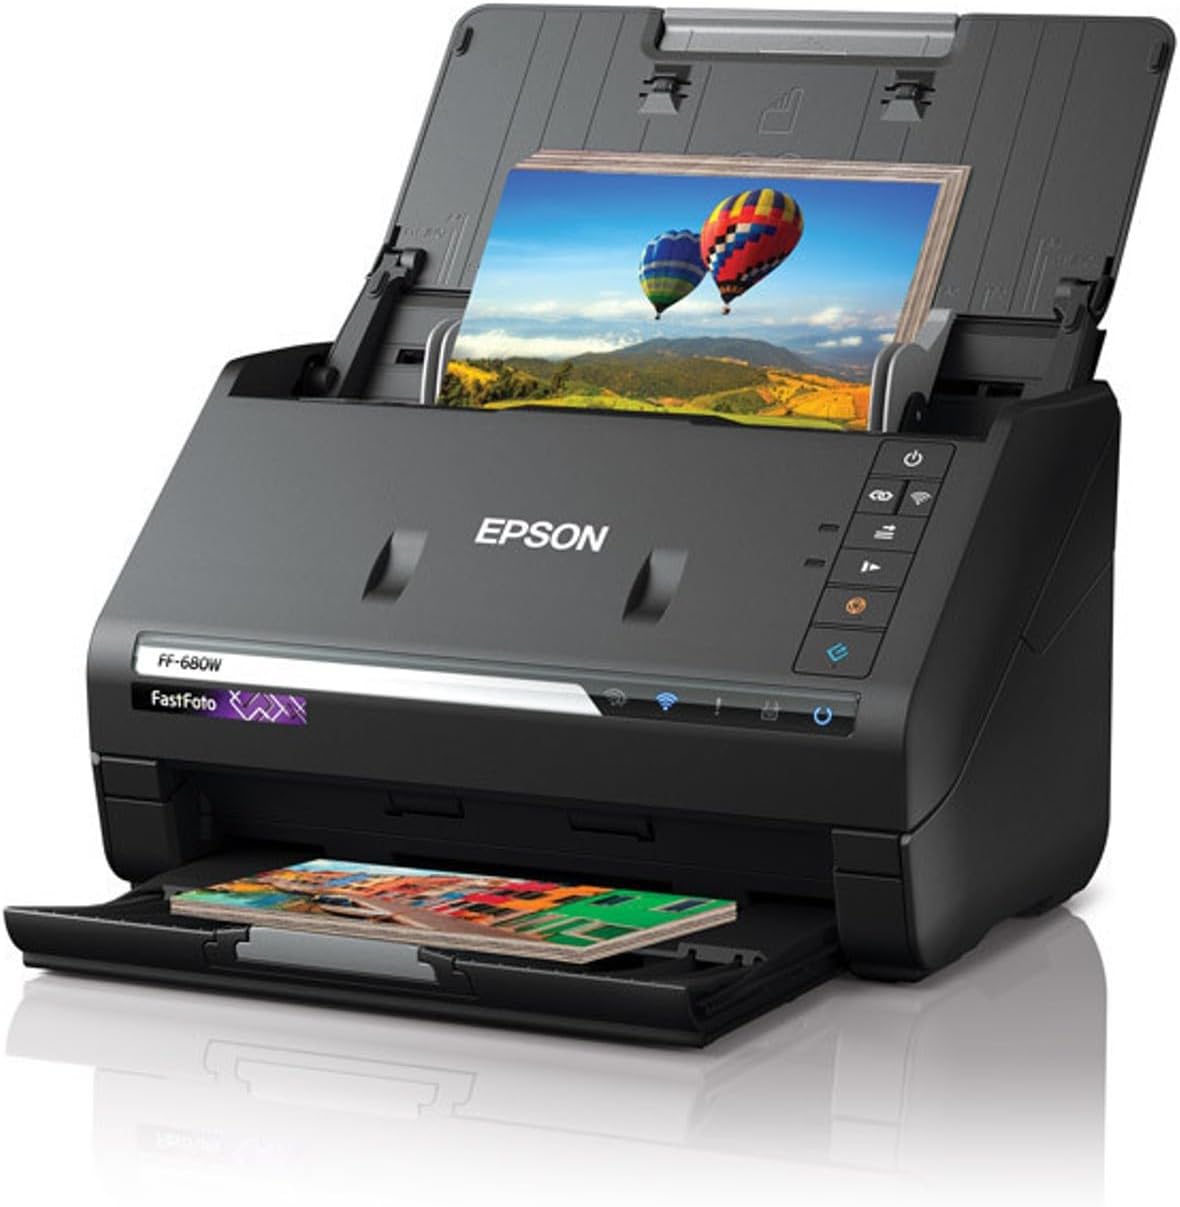 Epson FastFoto FF-680W Wireless High-Speed Photo and Document Scanning System, Black $499.99